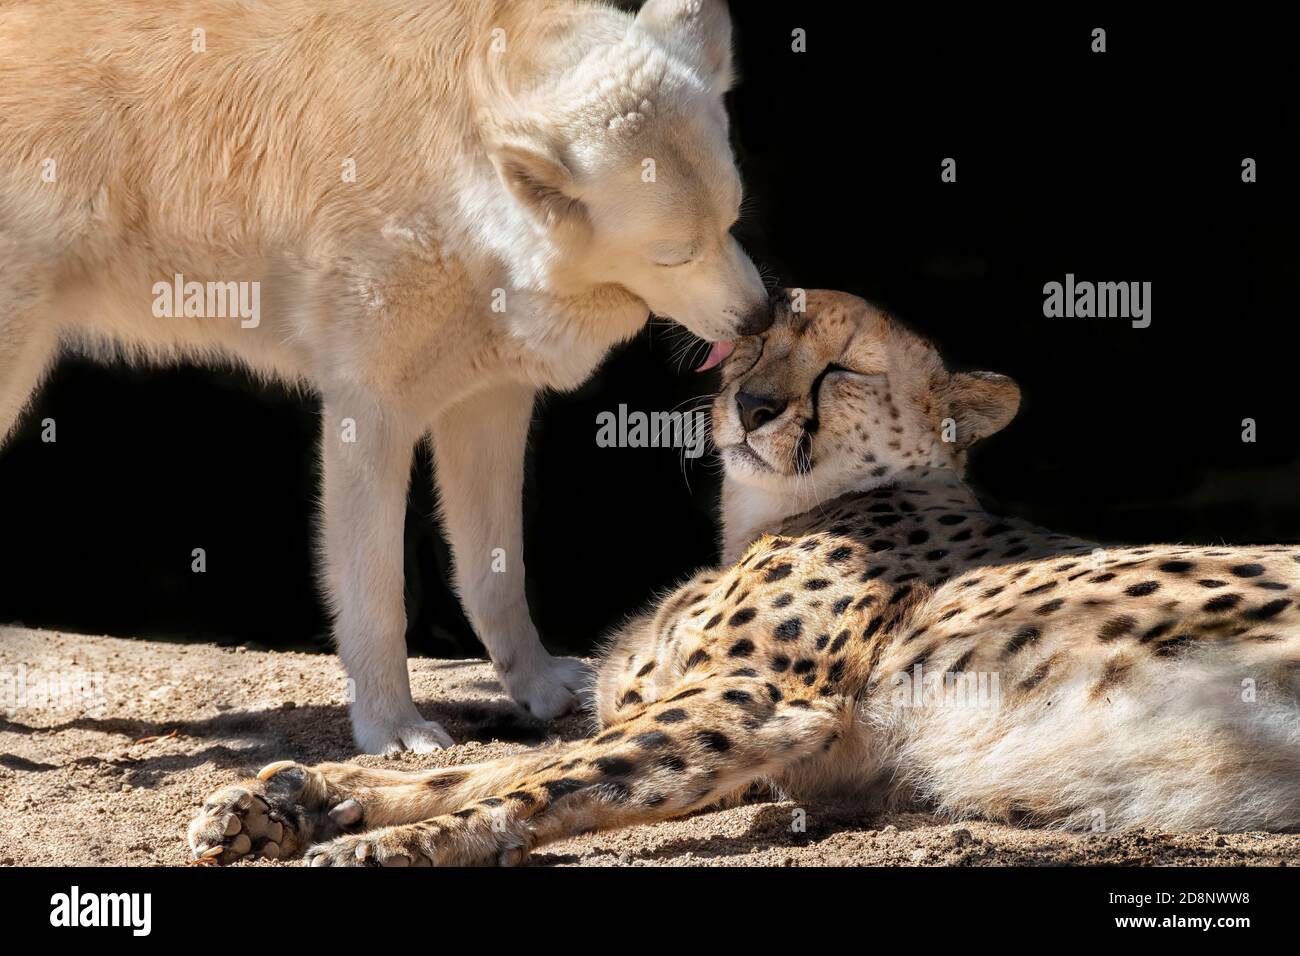 Cheetah and a golden retriever dog are unlikely best friends. Closeup of dog licking and cuddling the head of the cheetah Stock Photo